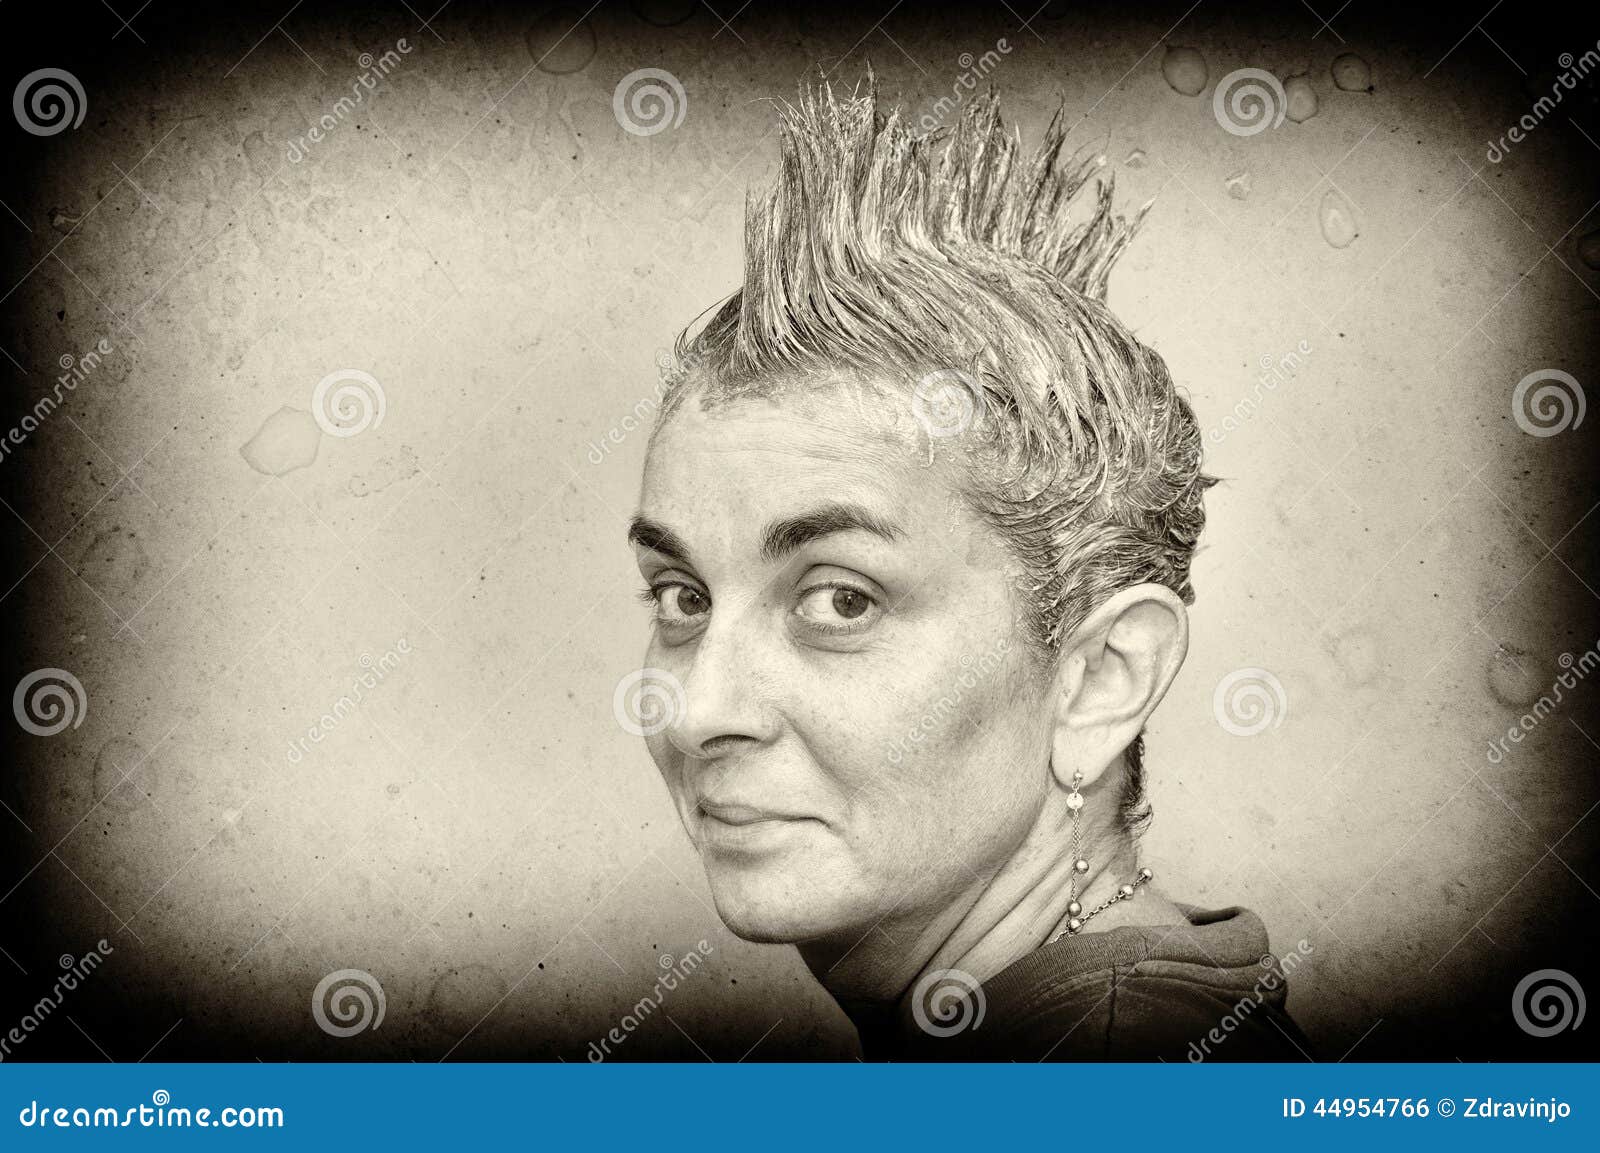 Woman with Spiky Blue Hair - wide 8